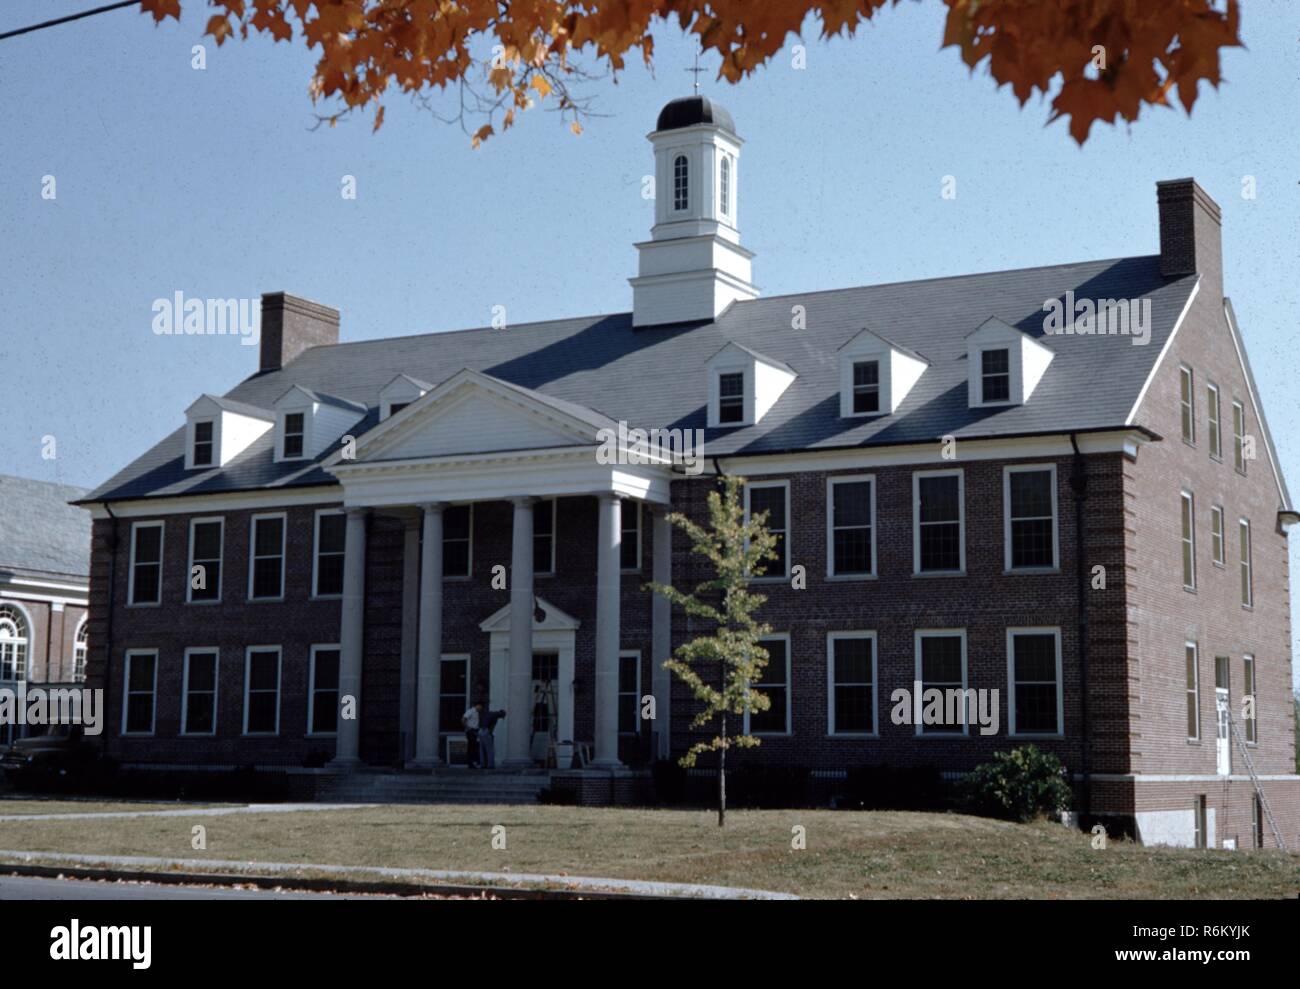 Large brick building at Asbury University, a Christian liberal arts university in Wilmore, Kentucky, 1955. () Stock Photo